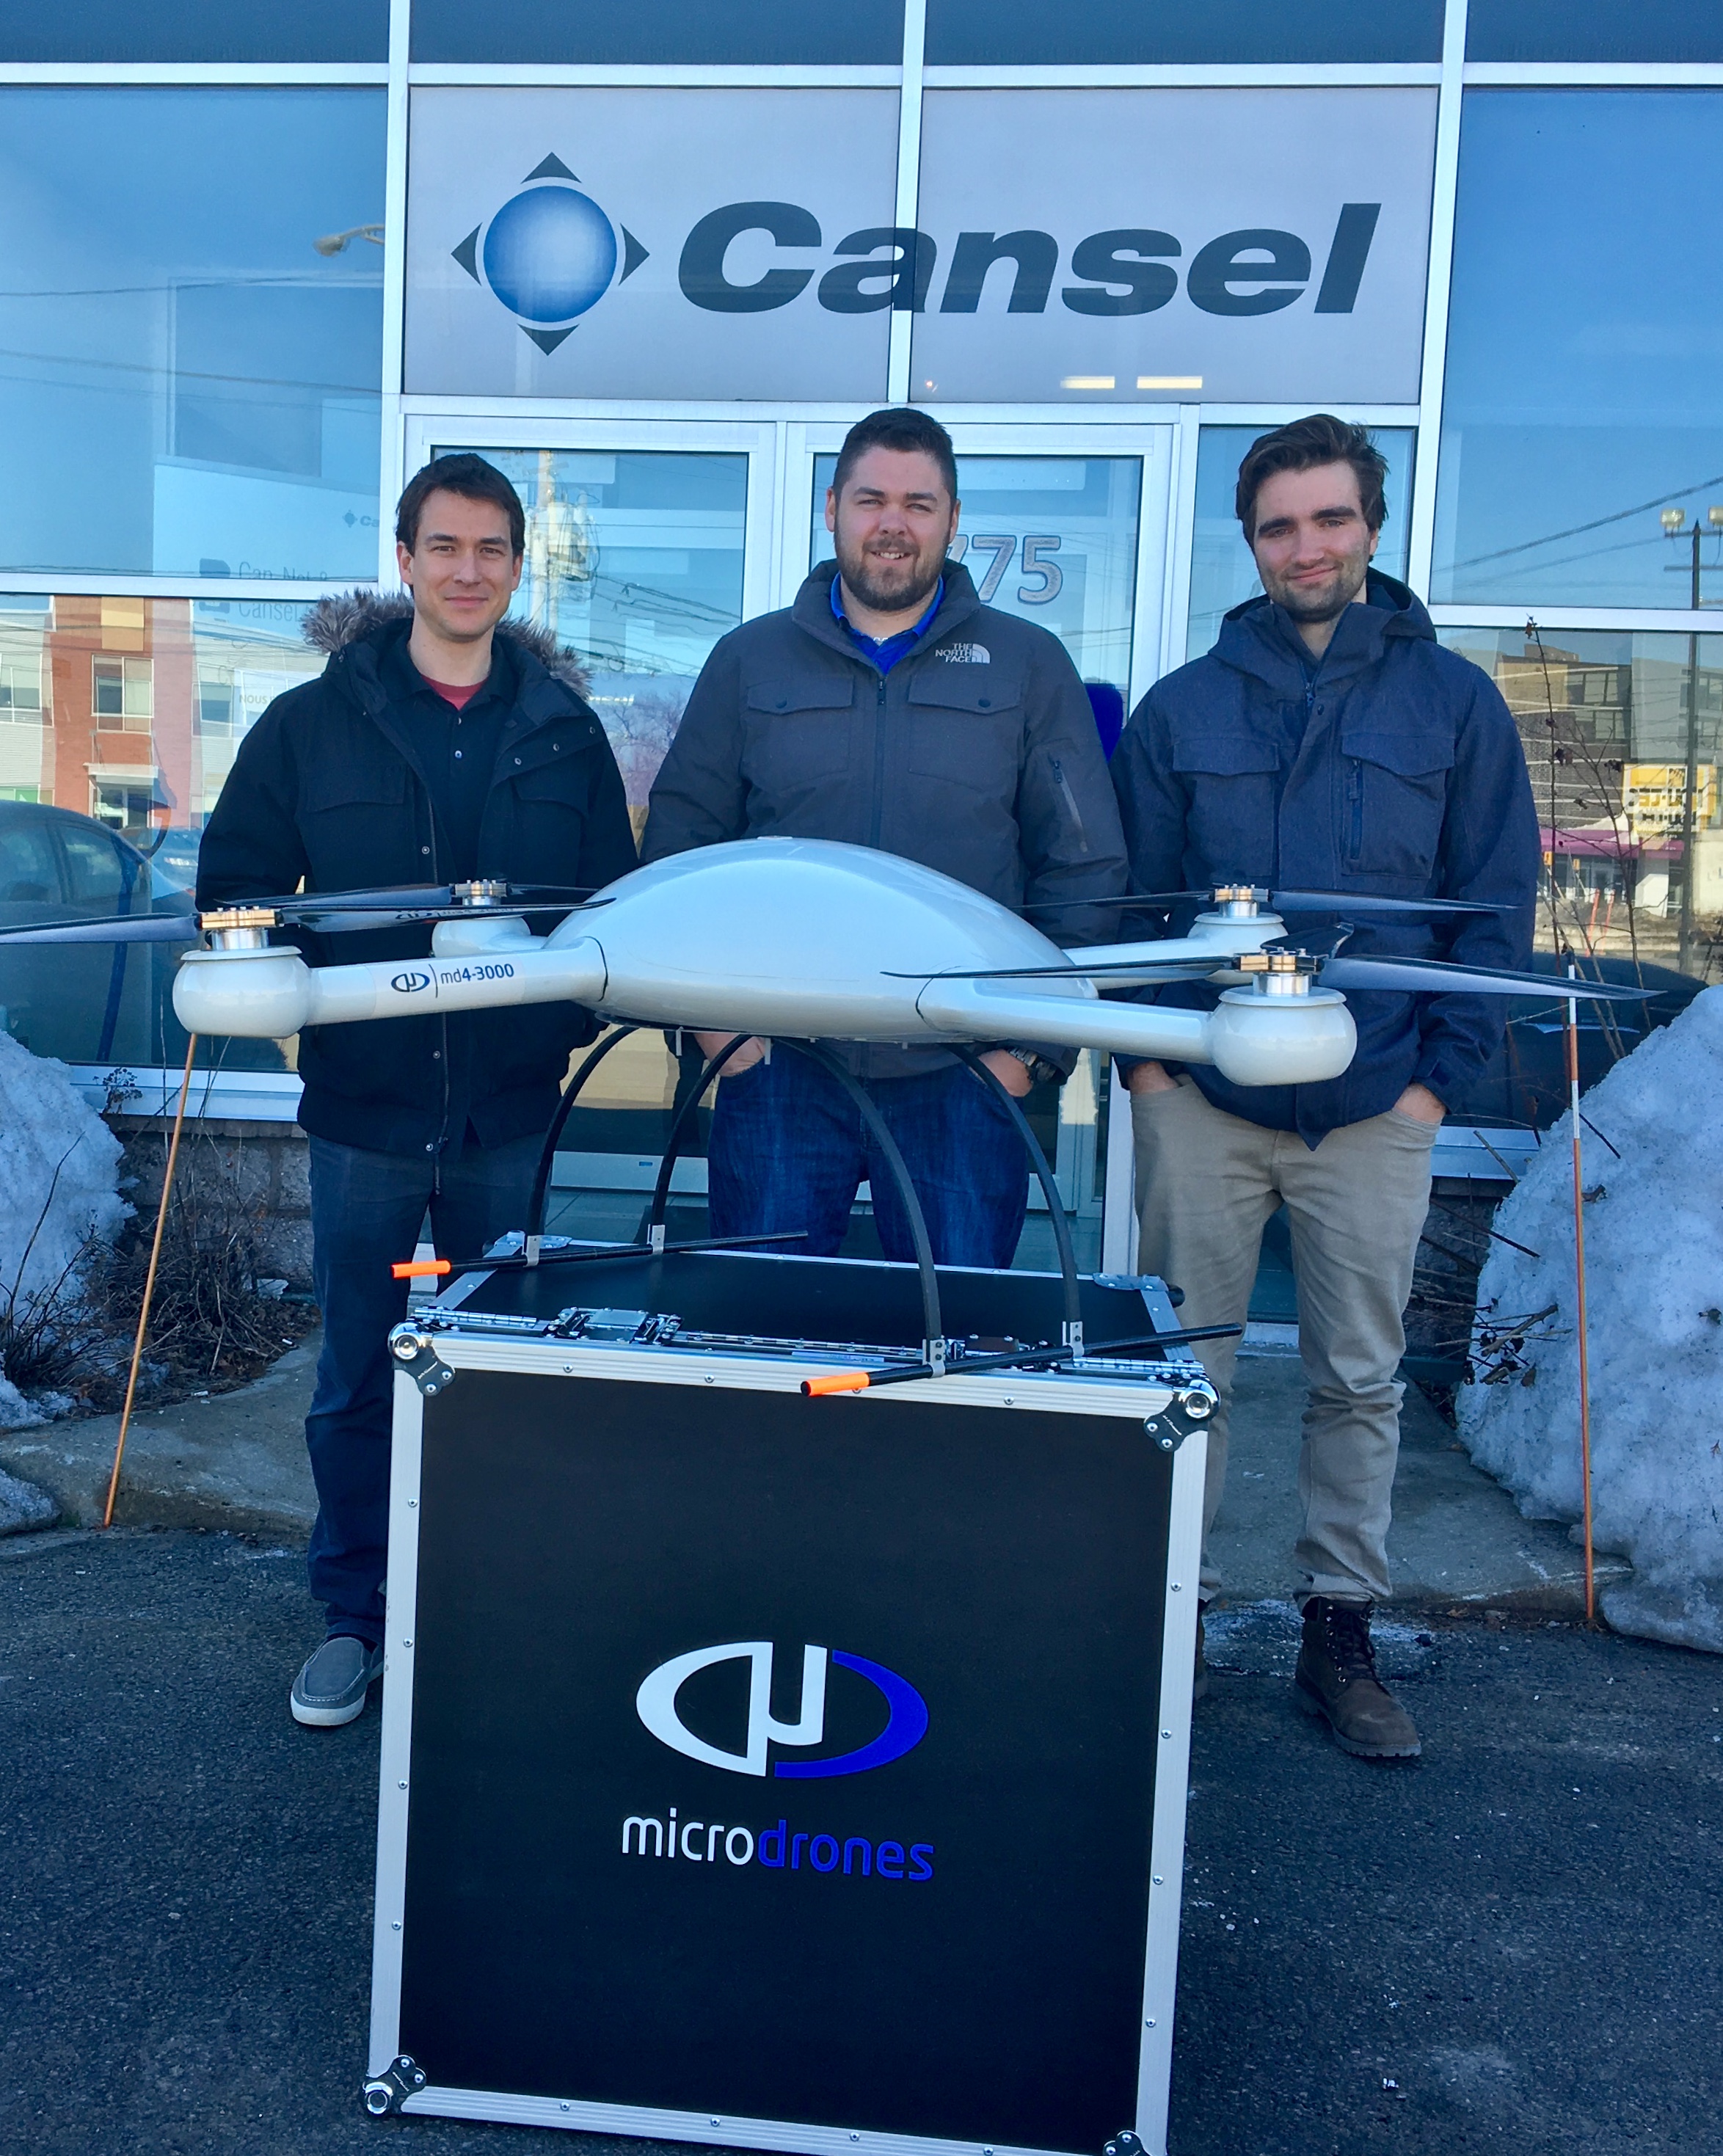 Members of the Cansel UAV Team are excited to present the new Microdrones offering to customers.